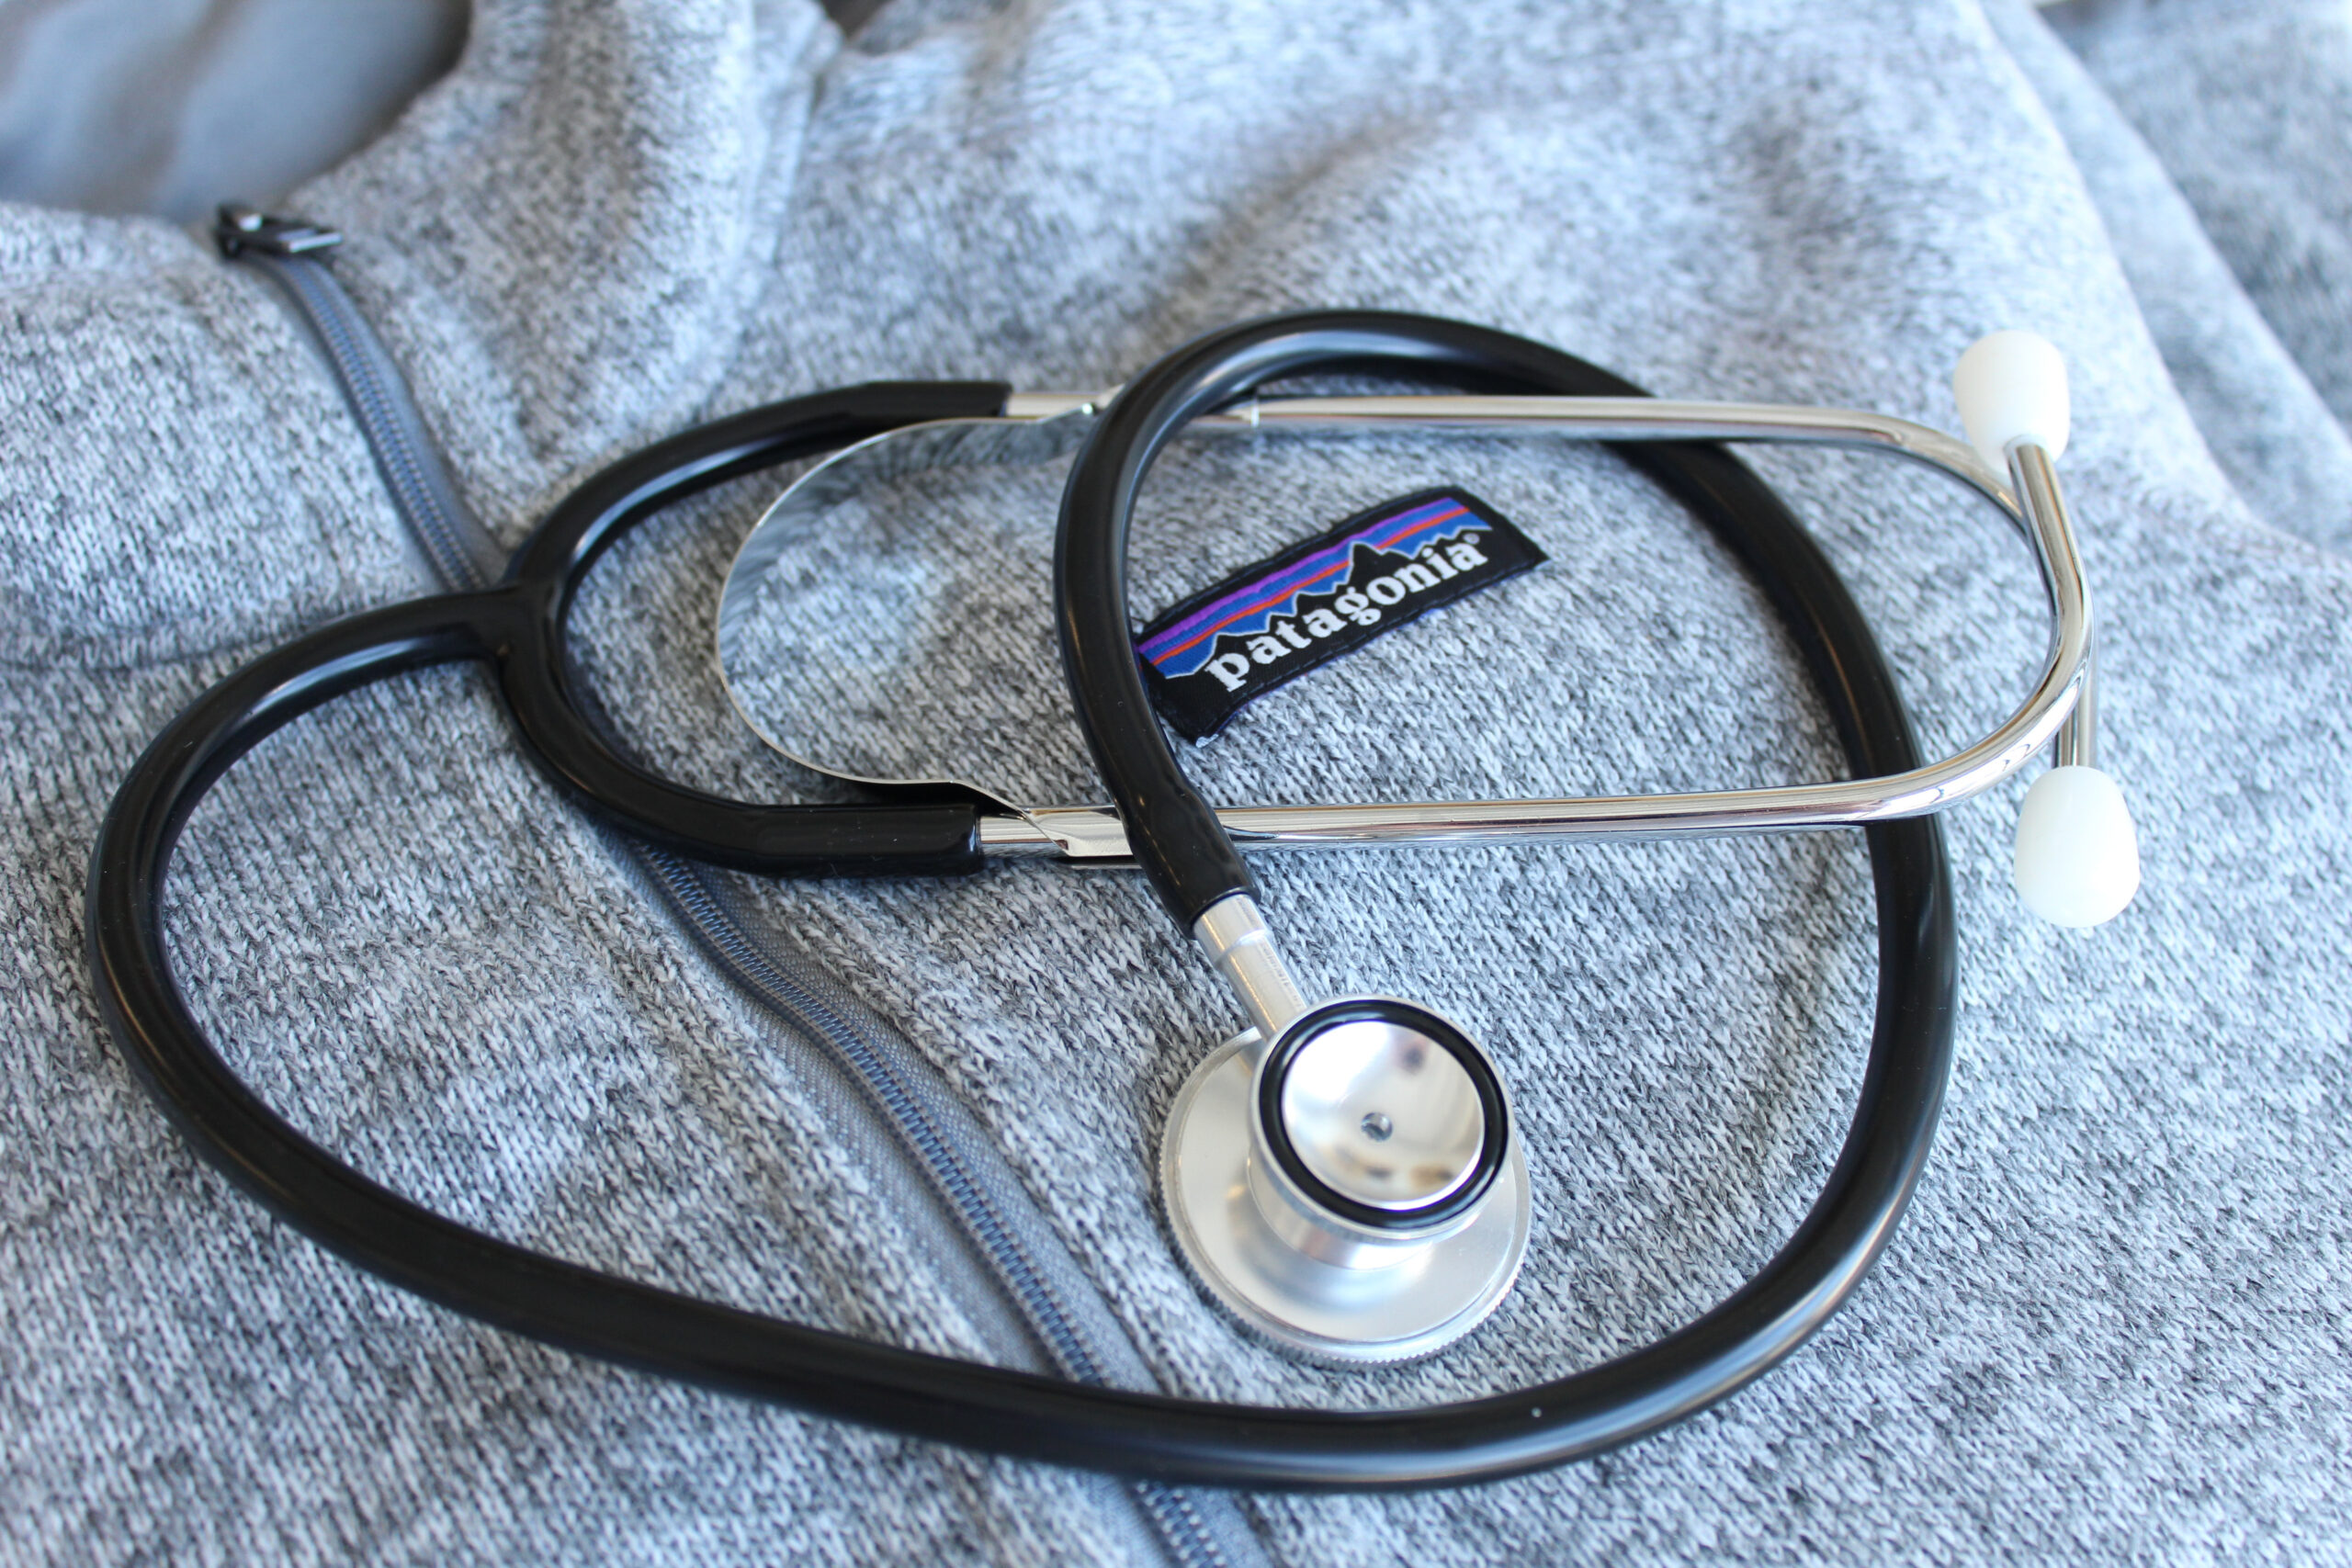 Patagonia Jacket with a stethoscope